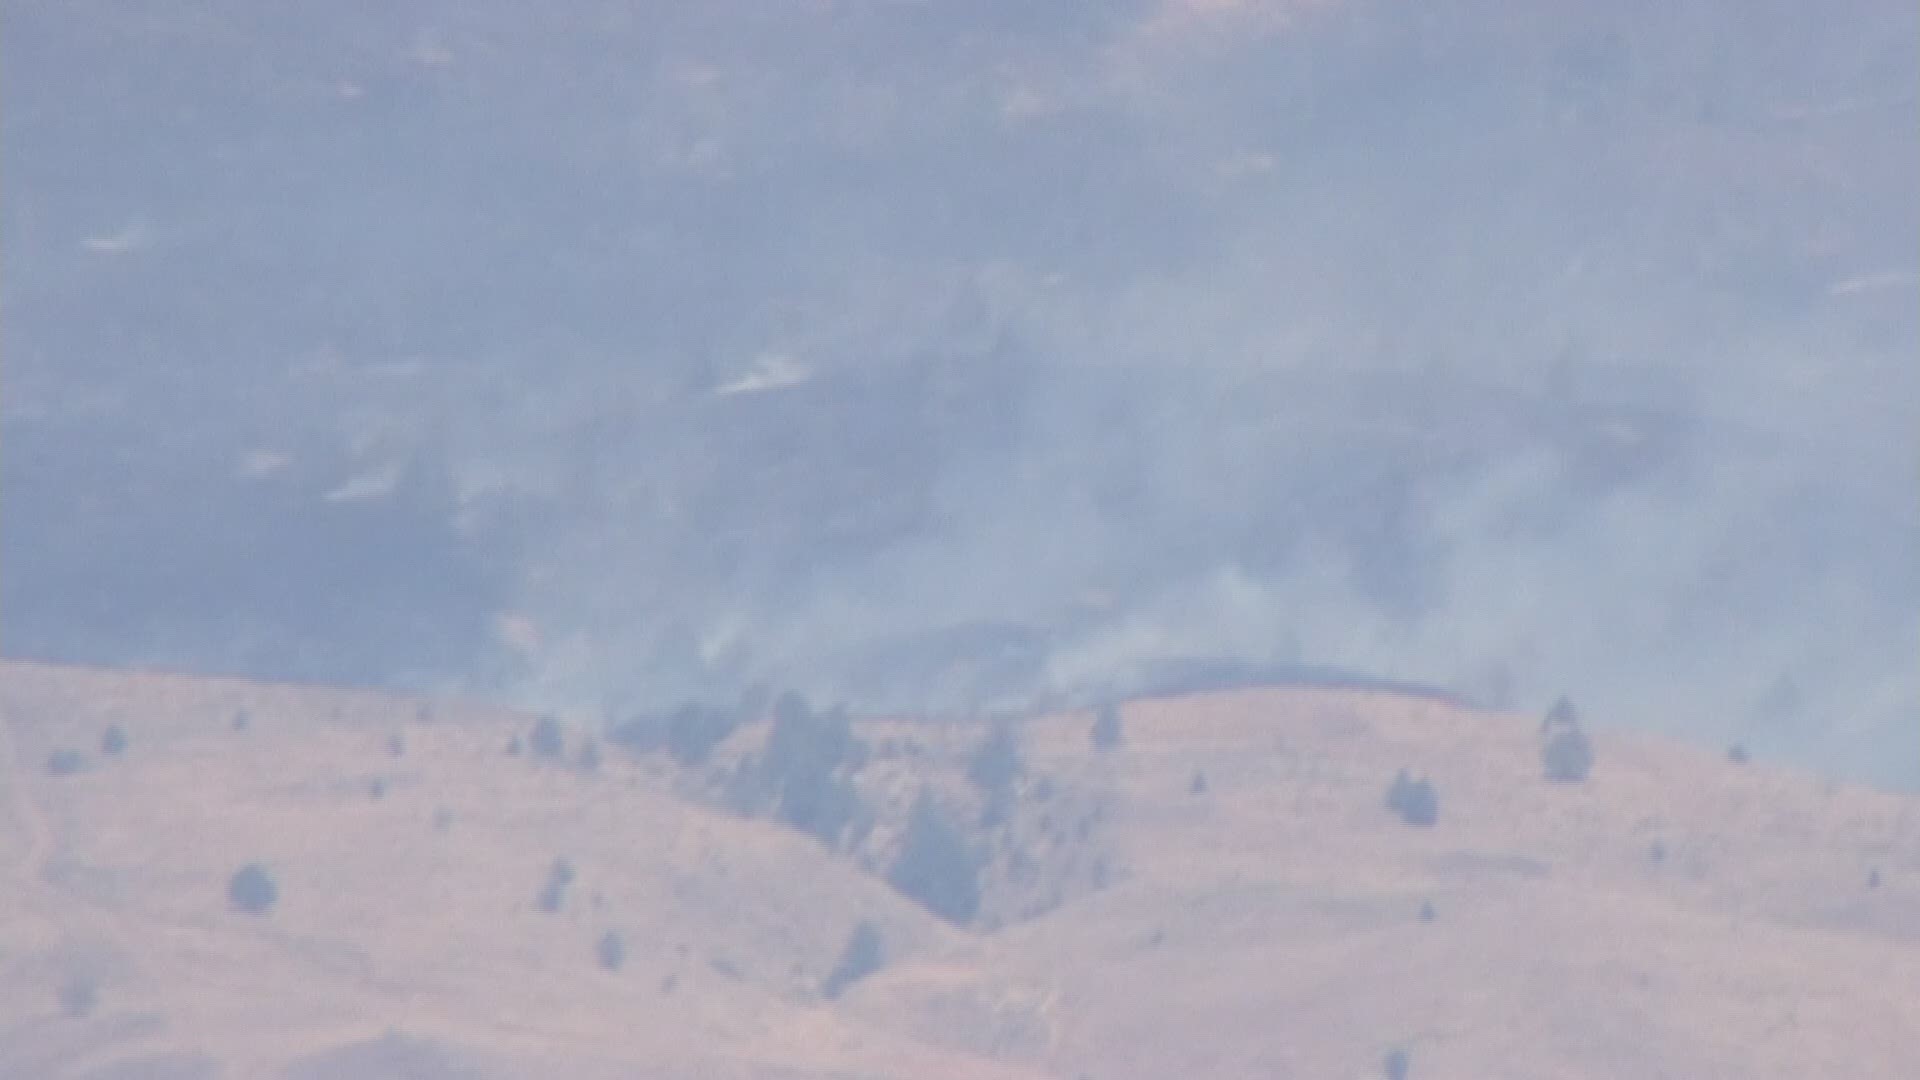 Video from Sky of the Boxcar wildfire in central Oregon.